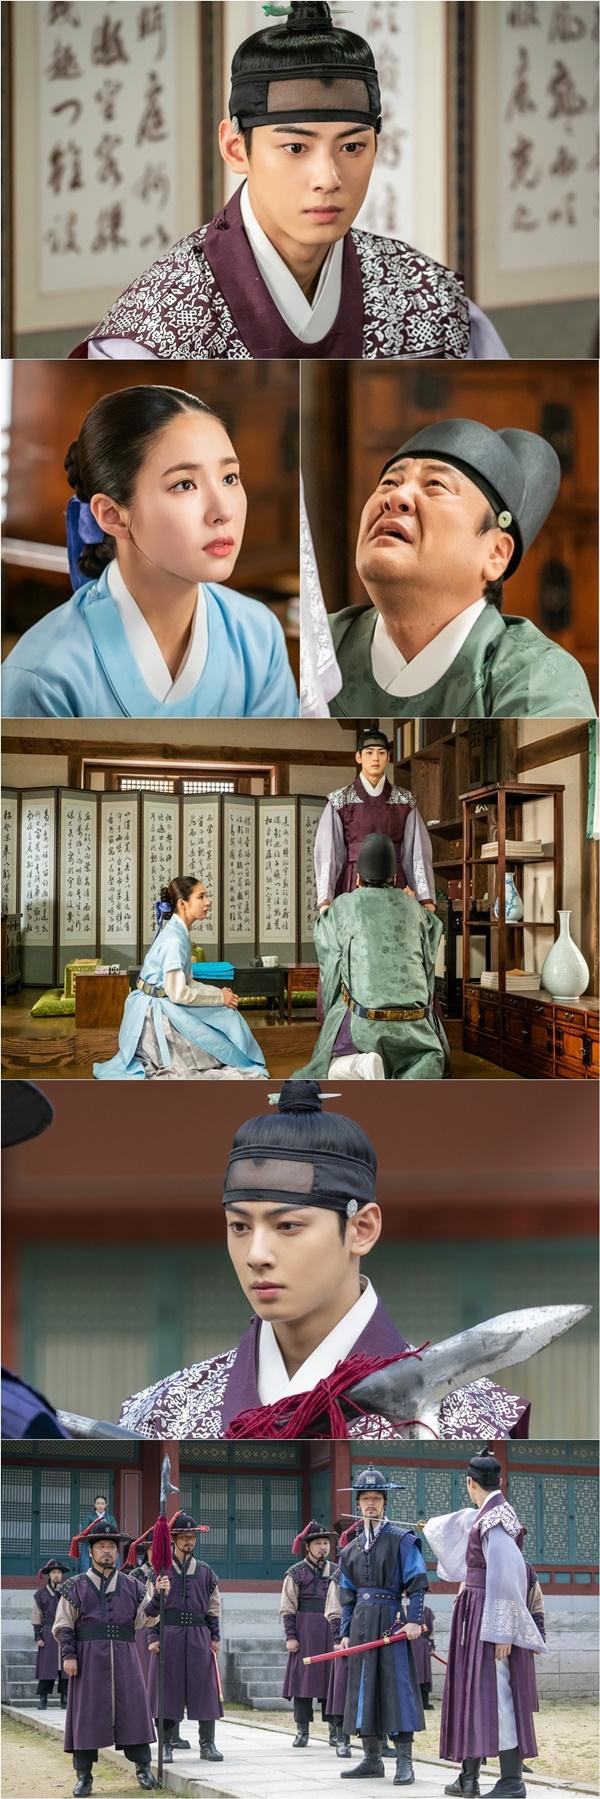 MBCs tree drama Na Hae-ryung (played by Kim Ho-soo / directed by Kang Il-soo, Han Hyun-hee / produced Green Snake Media) released Lee Rim (Cha Eun-woo) approaching the truth on the 24th.Na Hae-ryung, starring Shin Se-kyung, Cha Eun-woo, and Park Ki-woong, is the first problematic first lady of Joseon (Shin Se-kyung) and the anti-war mother Solo Prince Lee Rims Phil full romance release.Lee Ji-hoon, Park Ji-hyun, and Kim Yeo-jin, Kim Min-sang, Choi Duk-moon, and Sung Ji-ru.In the 33-36th episode of the new employee, Na Hae-ryung, Lee Rim was shown to be the enemy of Yeoung Ju Hee-gun Lee Kyeom.It was also surprising that Lee was a teacher in the Hodam Teachers Exhibition, which is the center of all events.Na Hae-ryung and Irim discovered the link between Kim Il-moks Sacho and Nokseodang, which contain all the truths of the incident 20 years ago, and approached the truth and raised interest in future development.Na Hae-ryung in the public photo is looking at the Leerim of a firm eye.This is the situation where Lee Lim decided to visit Kim Yeo-jin and ask for the truth.In this regard, Heo Sam-bo (Seong Ji-ru) of the inner circle holds I-rims leg and begs begging him not to go to the preparations, while I-rim is turning away from him, which makes him sad.Then, while Na Hae-ryung and Sambo were heading for the preparations, Irim was restrained by the gold army.Soon, Irim is aiming at the gold soldiers who stop him, and he is shooting charisma that can not be tolerated, amplifying the tension.As such, Lee Lim is foreseeing that he will run into the past 20 years ago as the enemy of the King Hee Young-gun, and the truth will be revealed and what kind of blue will happen.I am going to visit Lim in preparation for the release of Na Hae-ryung and Sambo, said Na Hae-ryung, a new employee. I would like to ask for your attention until the end of the conversation with Lim, who is the only relative of his family.Shin Se-kyung, Cha Eun-woo and Park Ki-woong will appear on Wednesday, 25th at 8:55 pm 37-38 times.